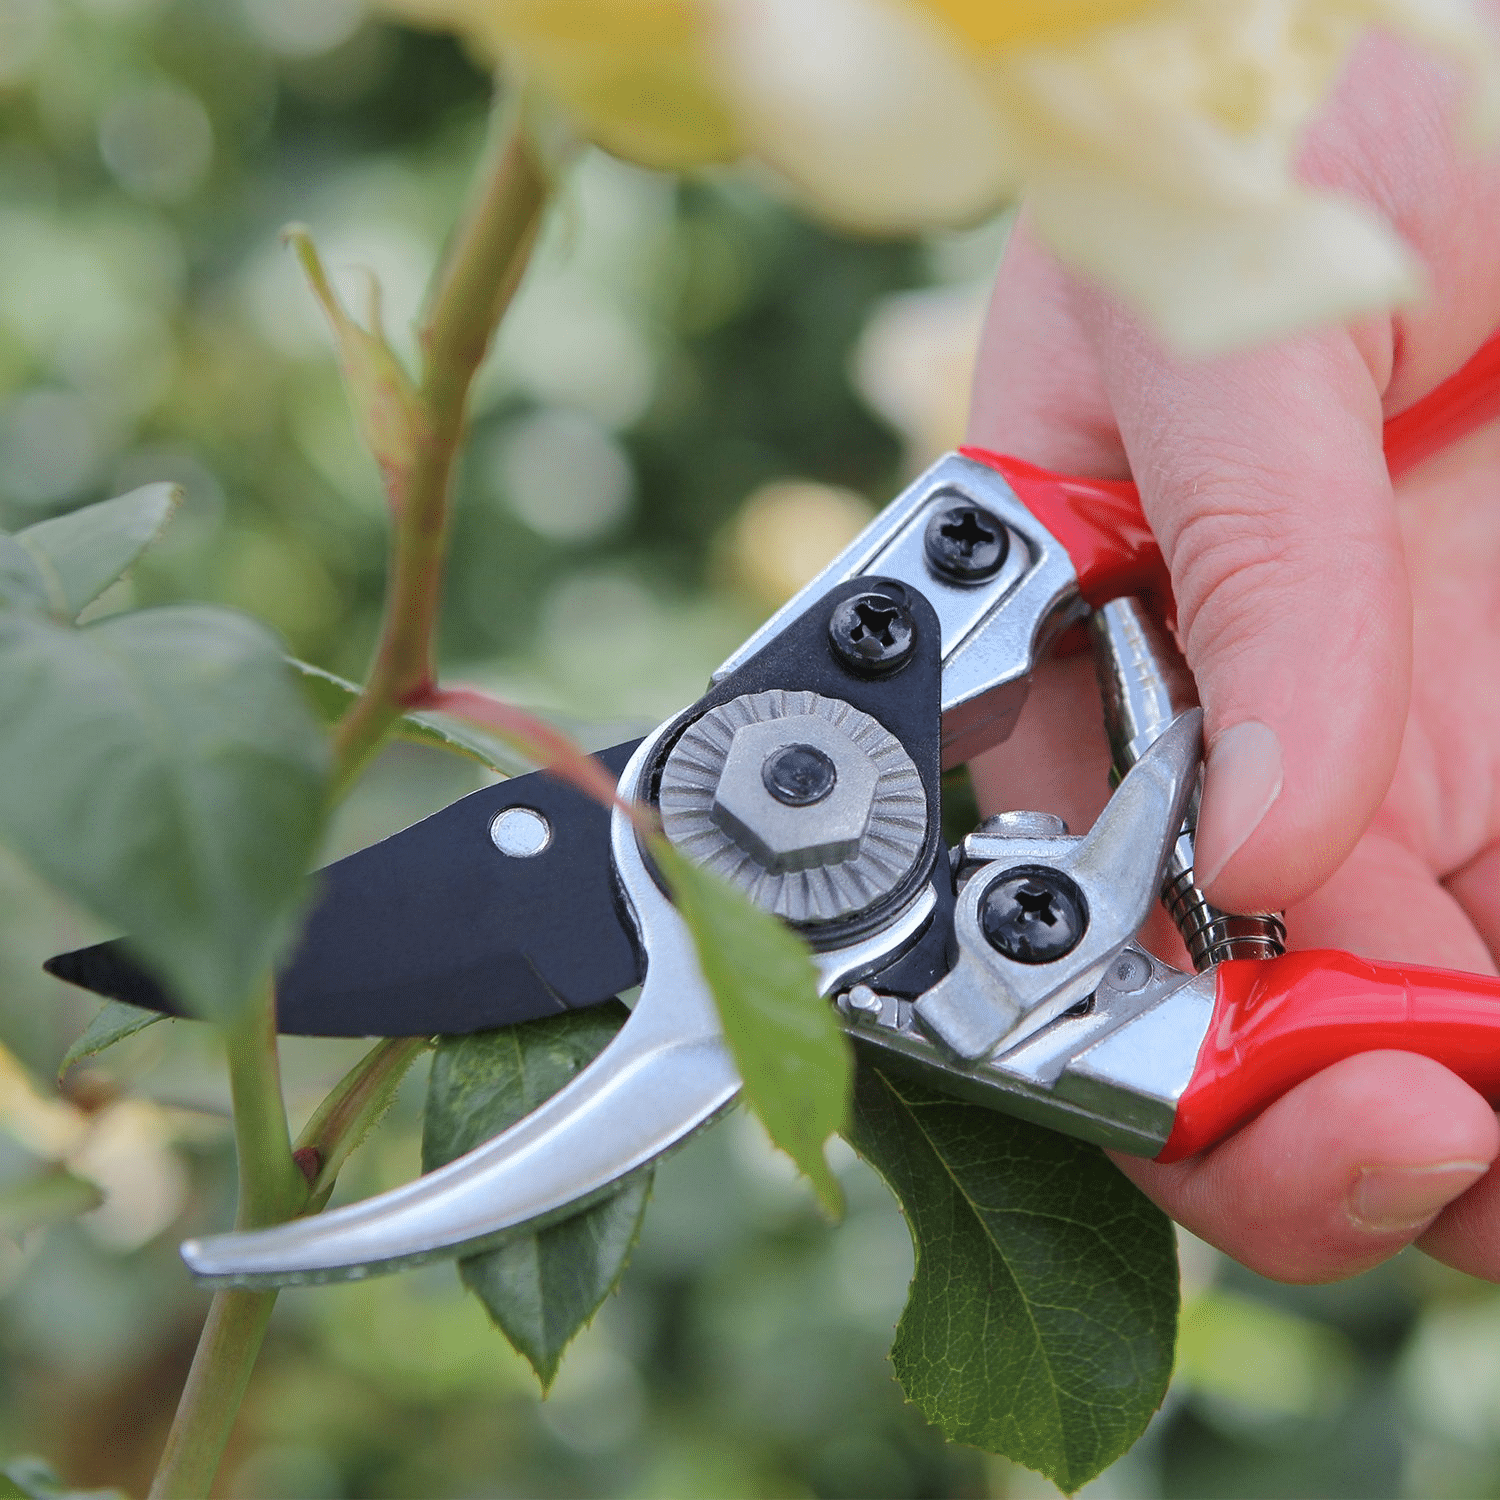 Pruning shears cutting a plant